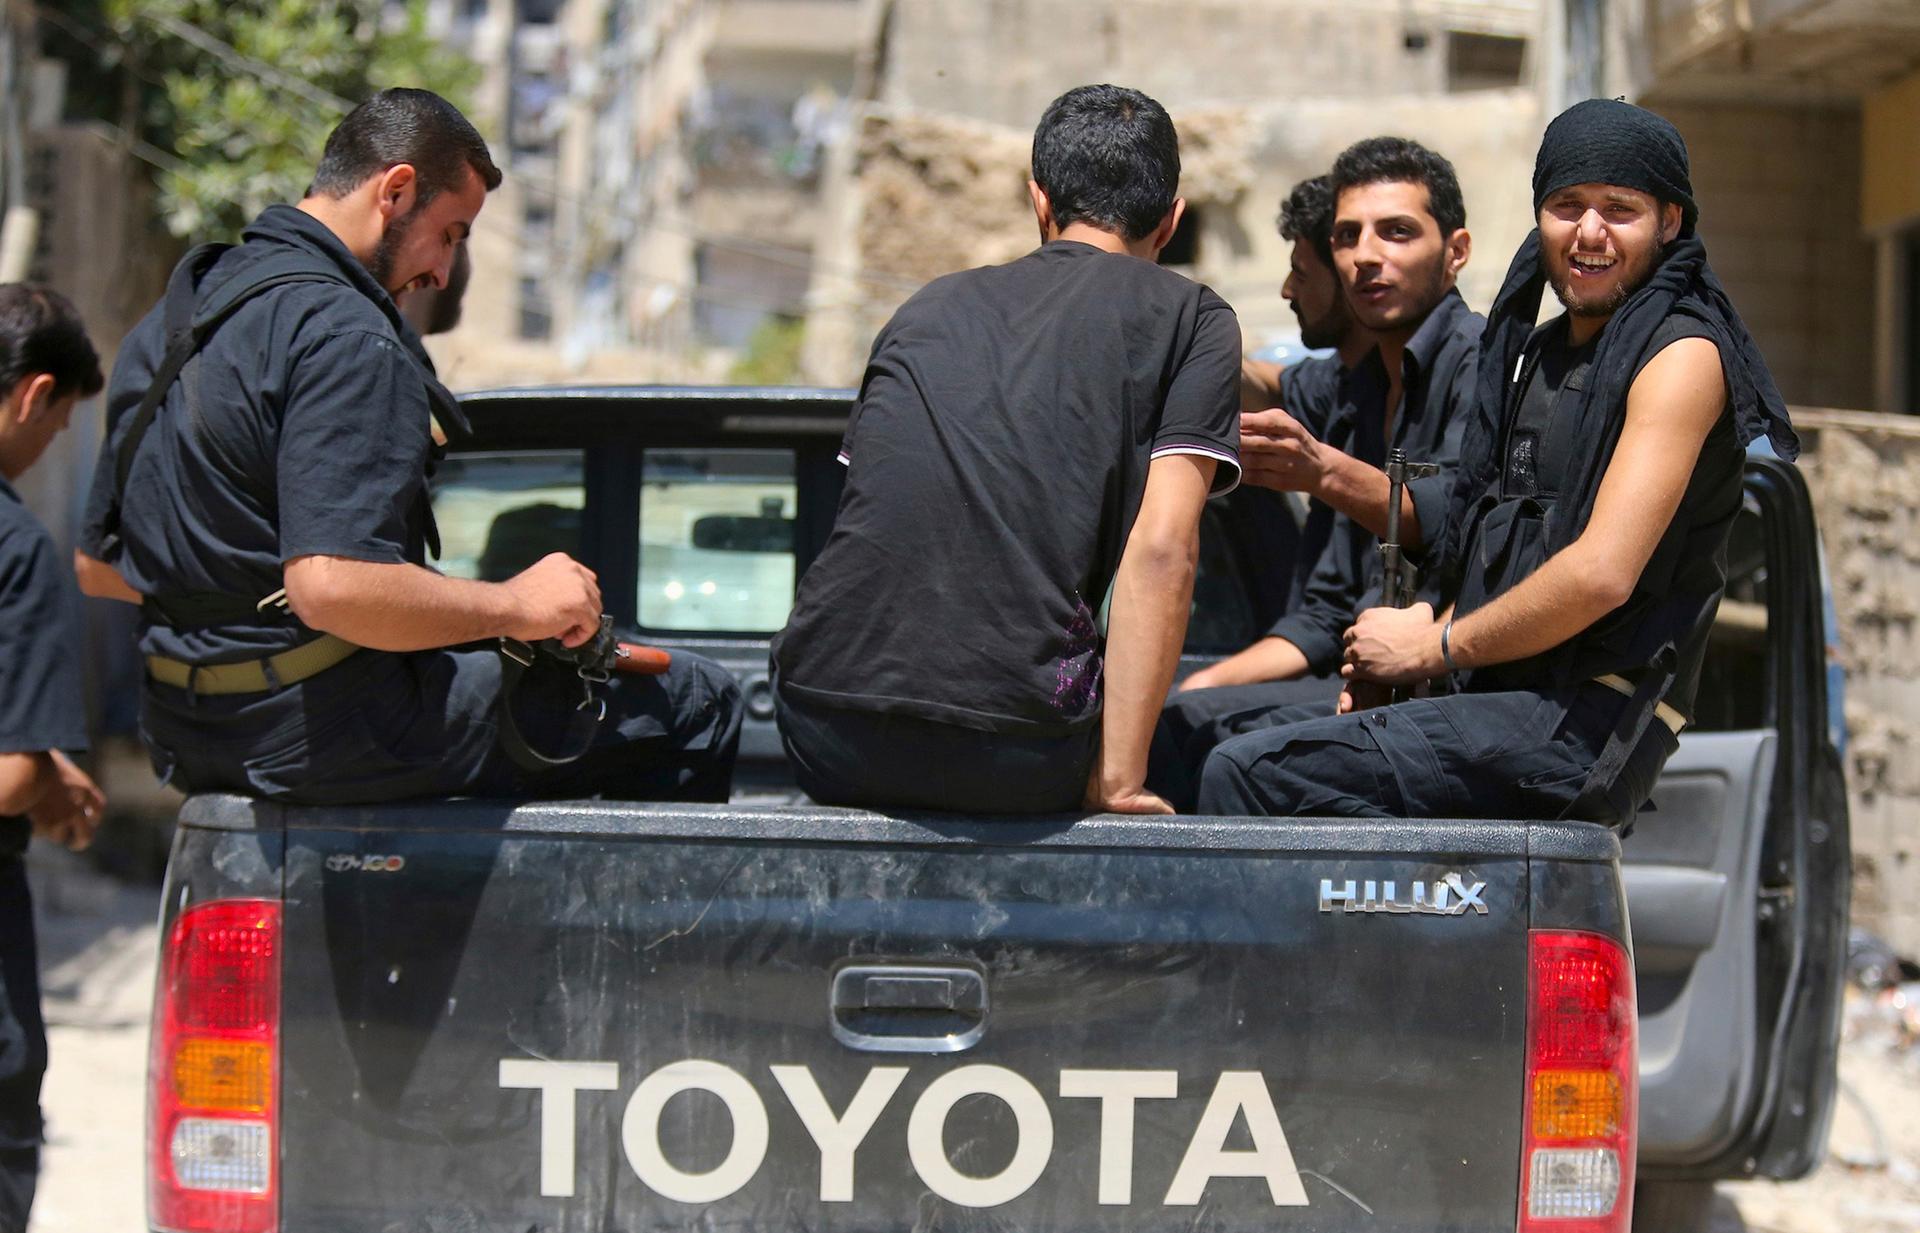 Rebels operating under the Free Syrian Army sit in a Hilux pickup truck 